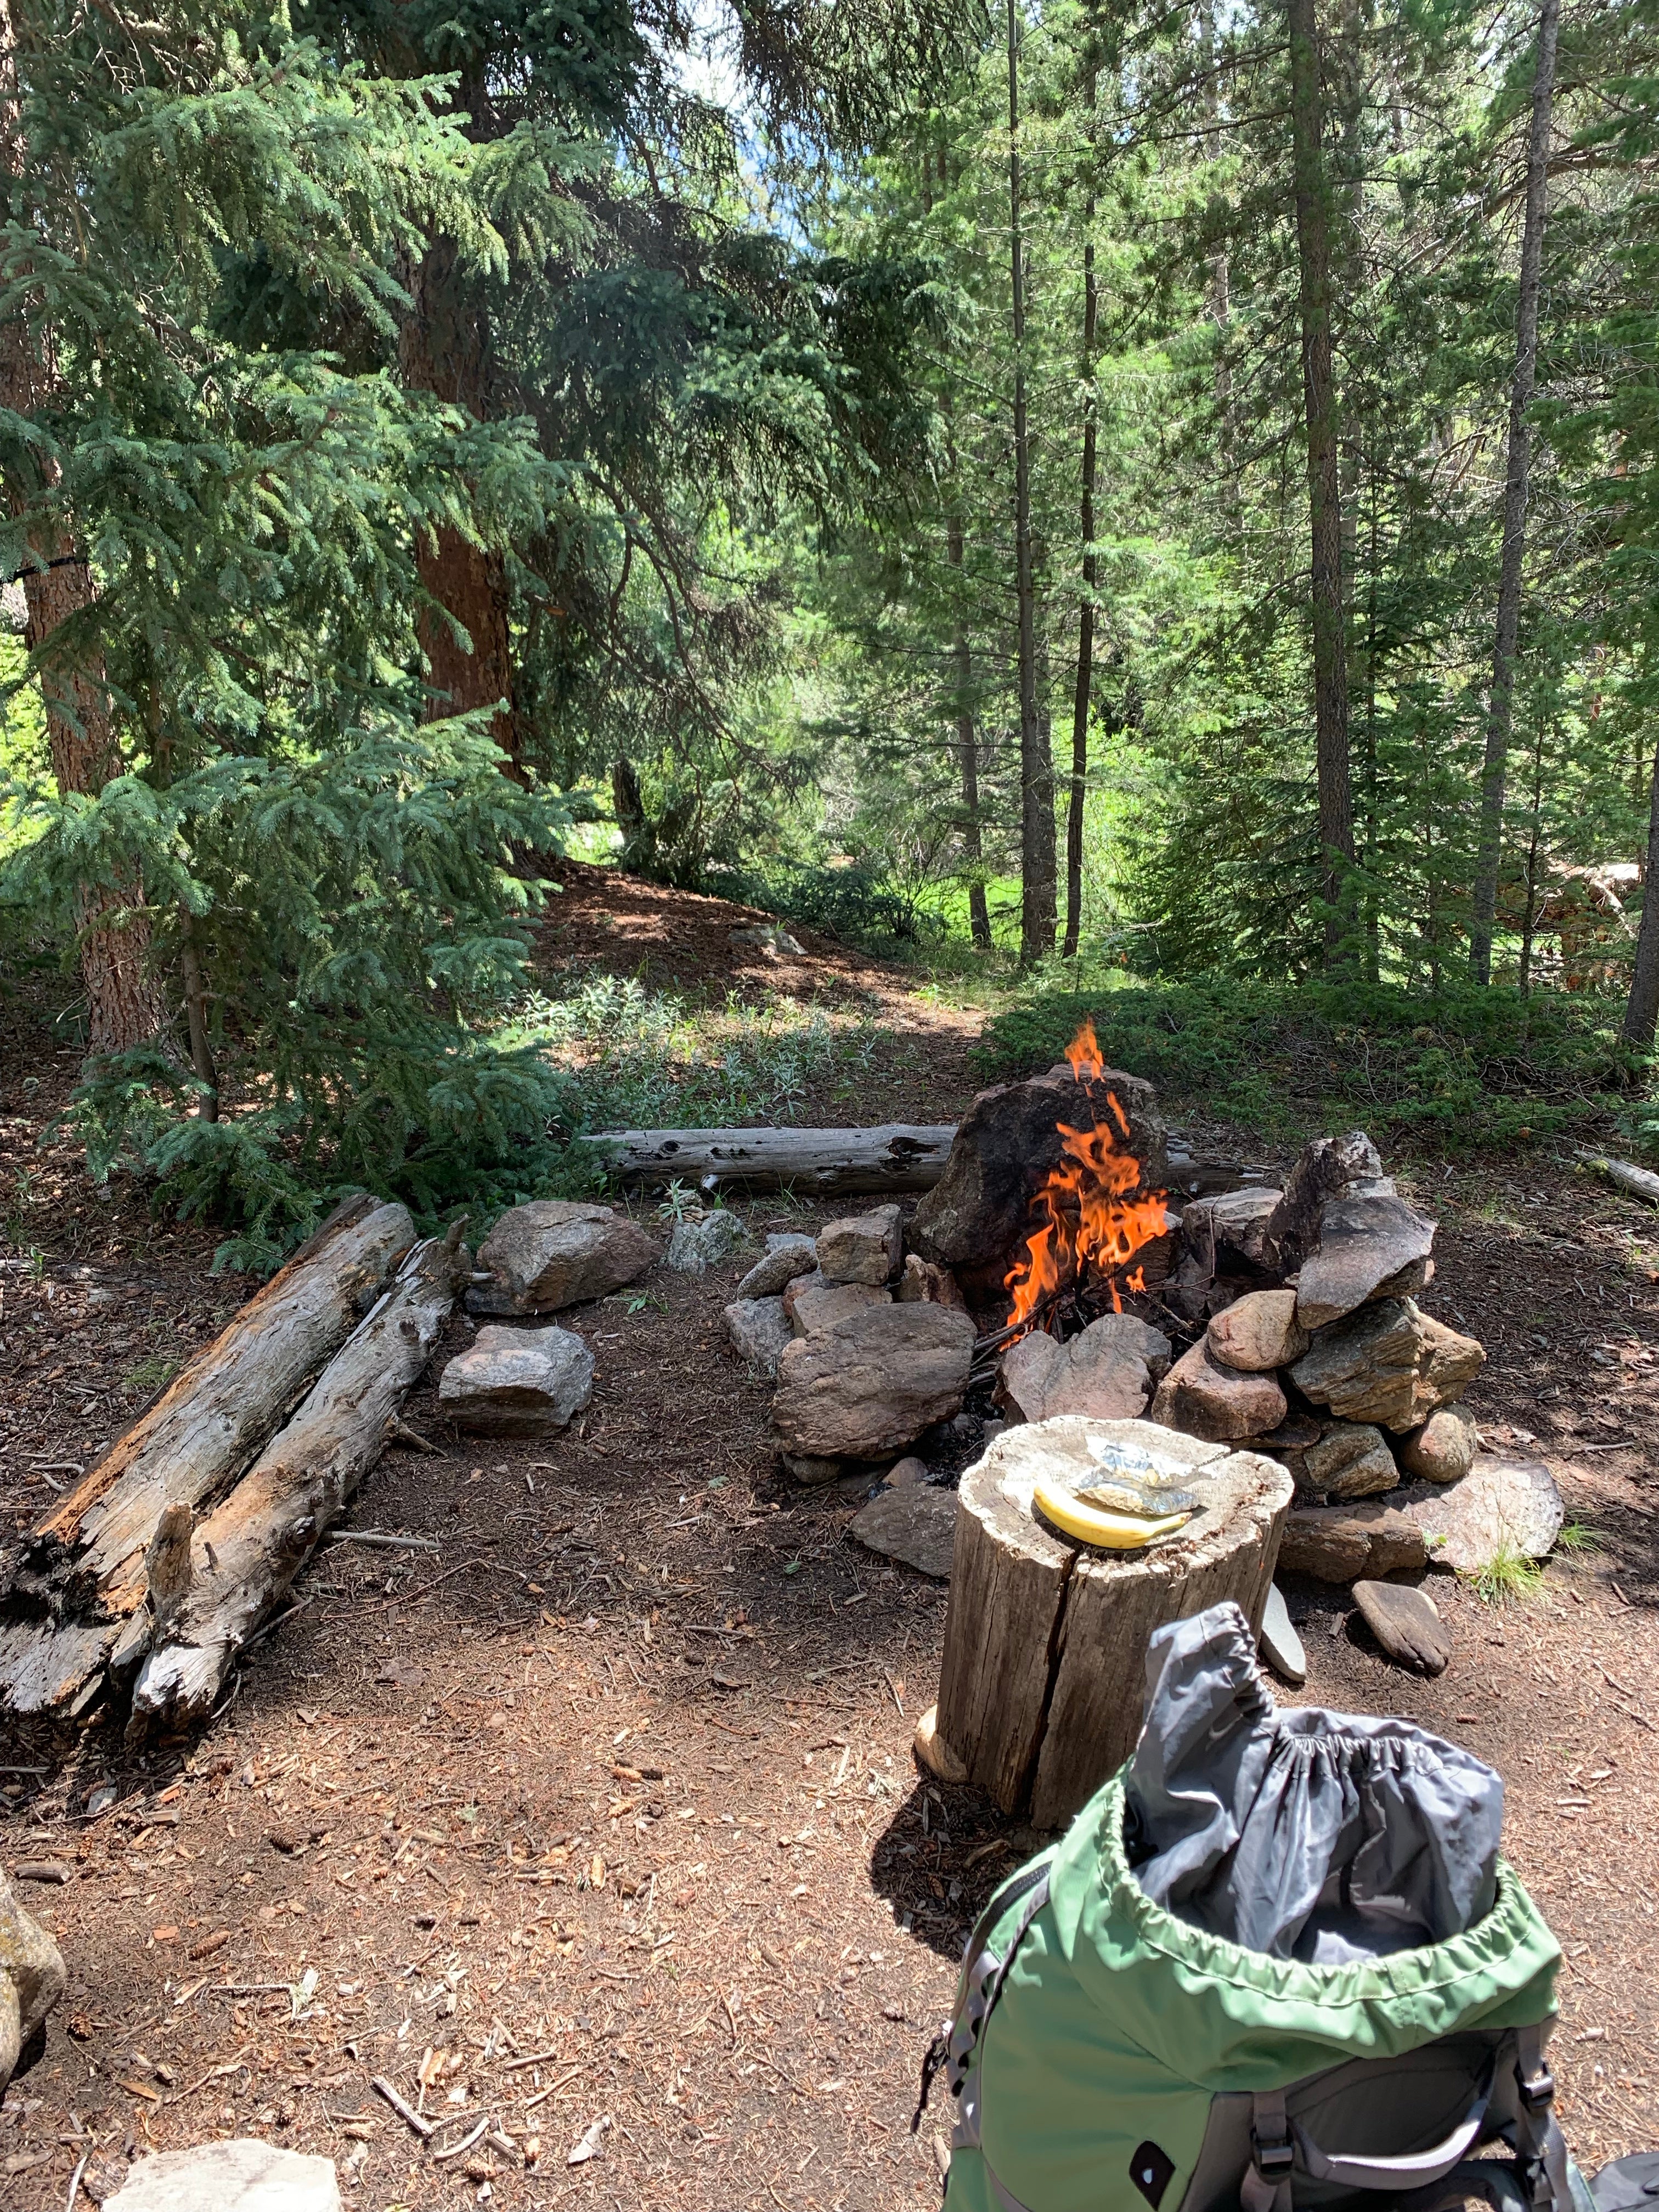 Camper submitted image from Ceran St. Vrain Trail Dispersed Camping - 1